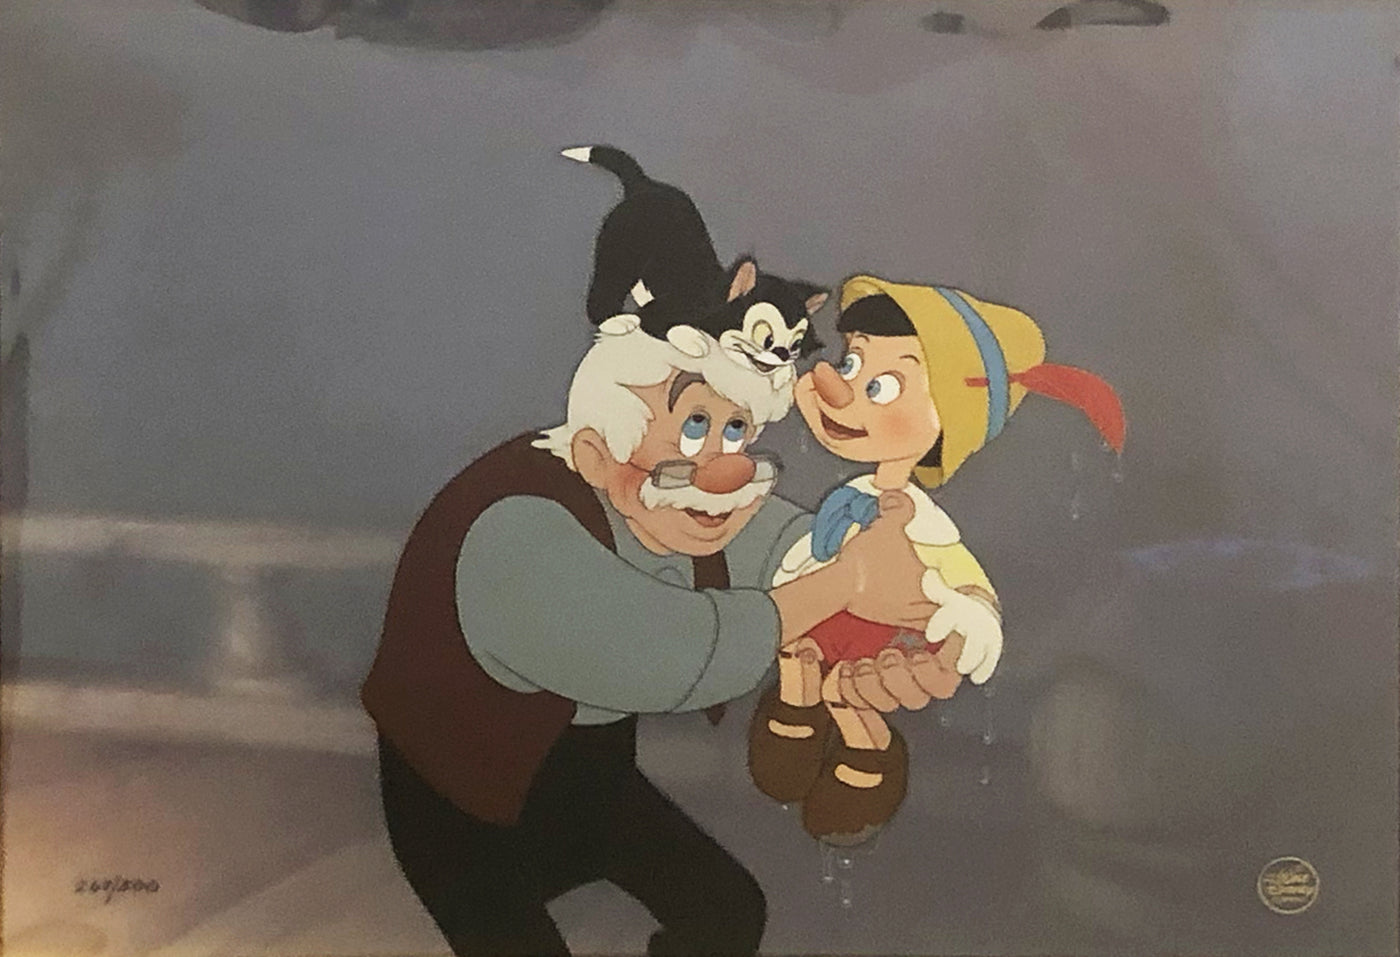 Walt Disney Limited Edition Cel Together Again from Pinocchio, Featuring Pinocchio, Geppetto and Figaro